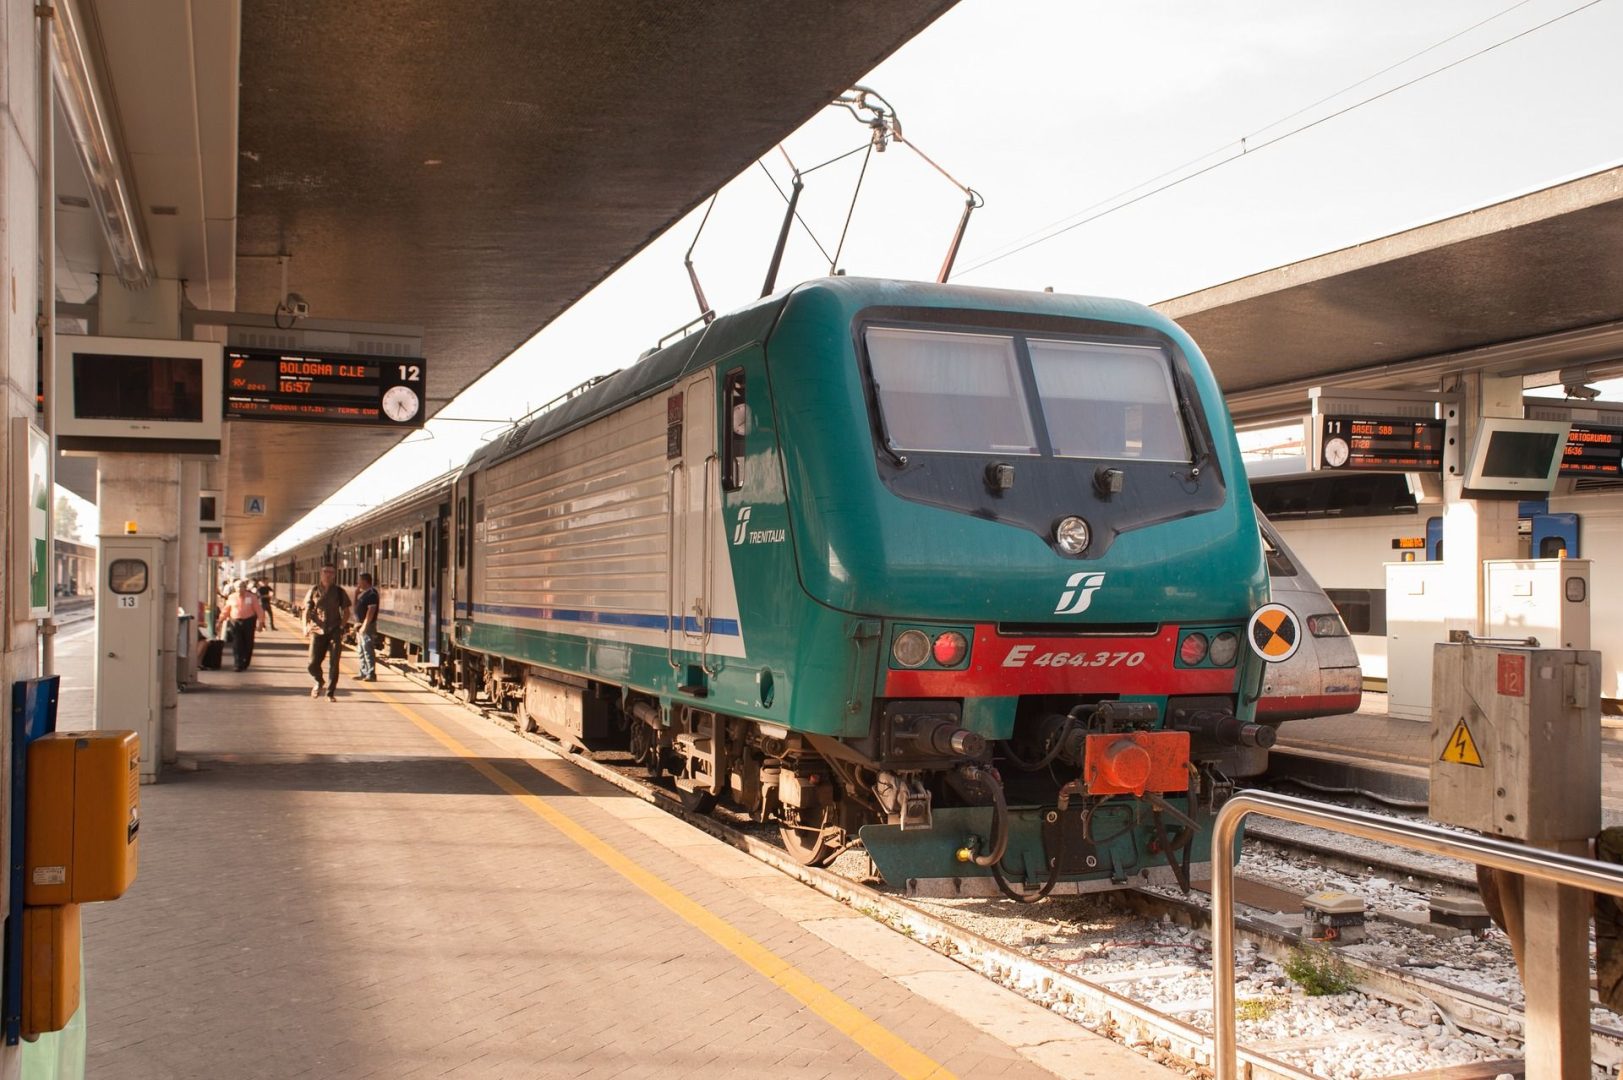 Train ready to leave at a station in Italy